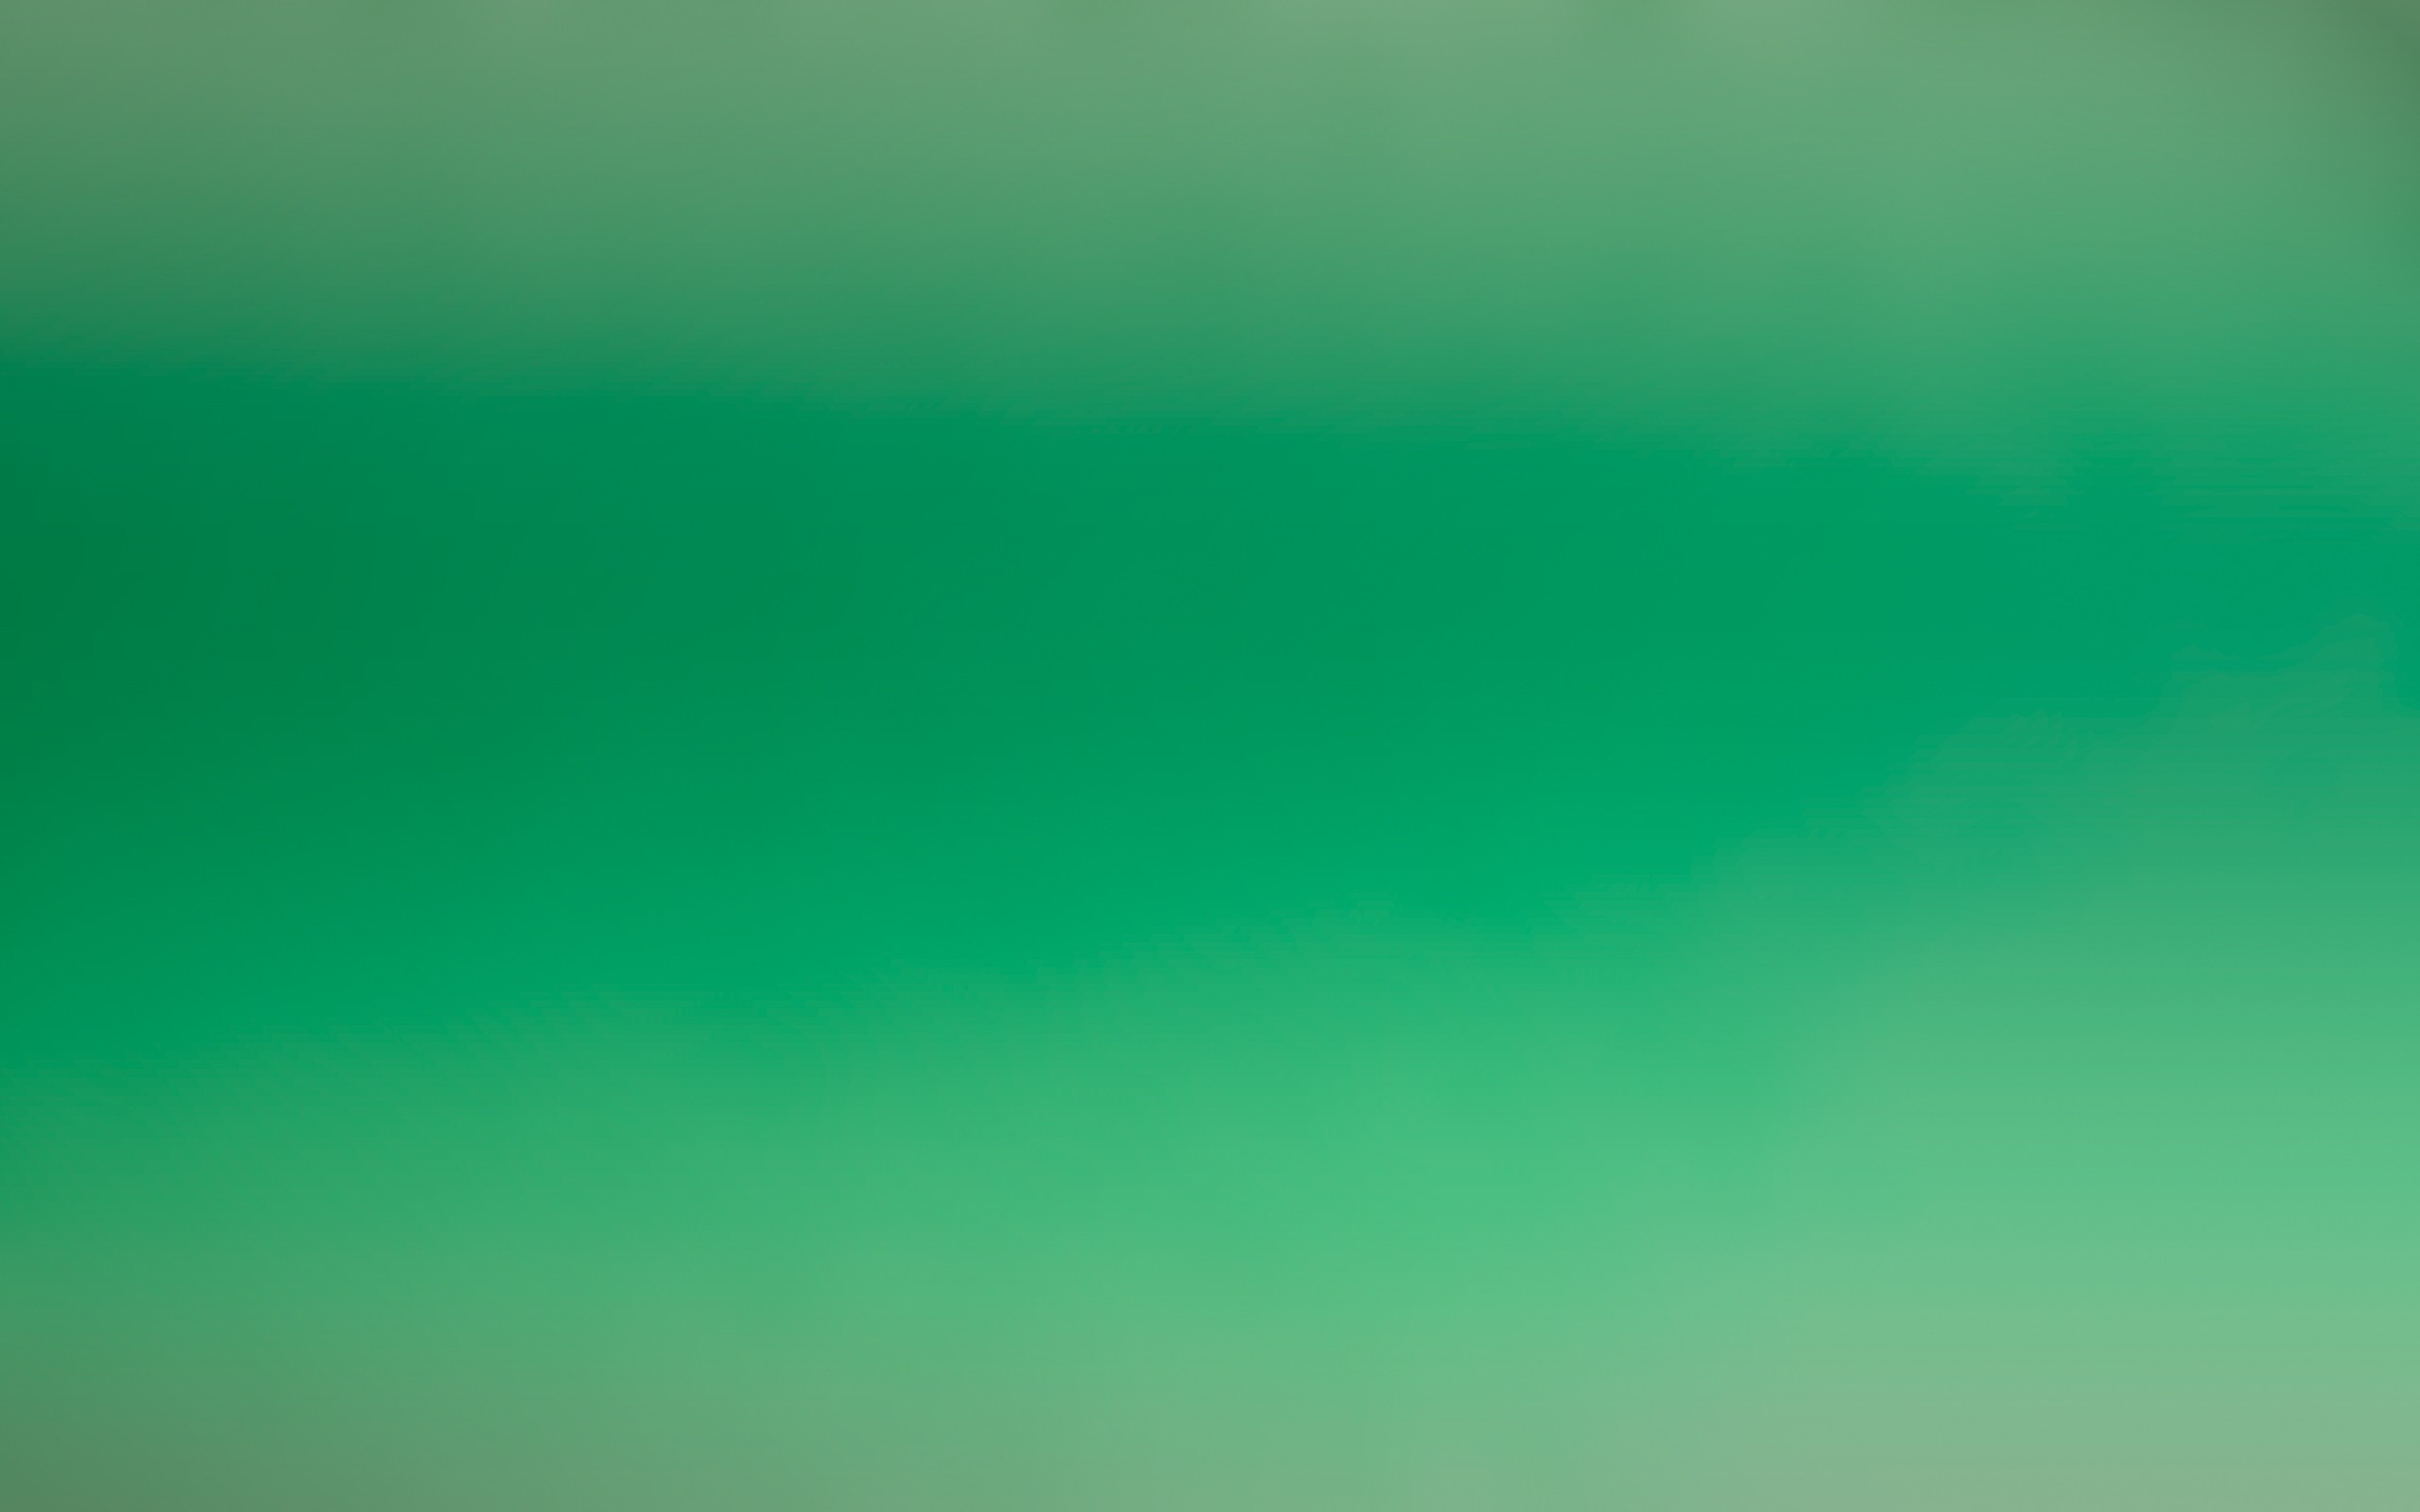 green, Minimalistic, Gradient, Simple, Colors, Green, Background Wallpaper